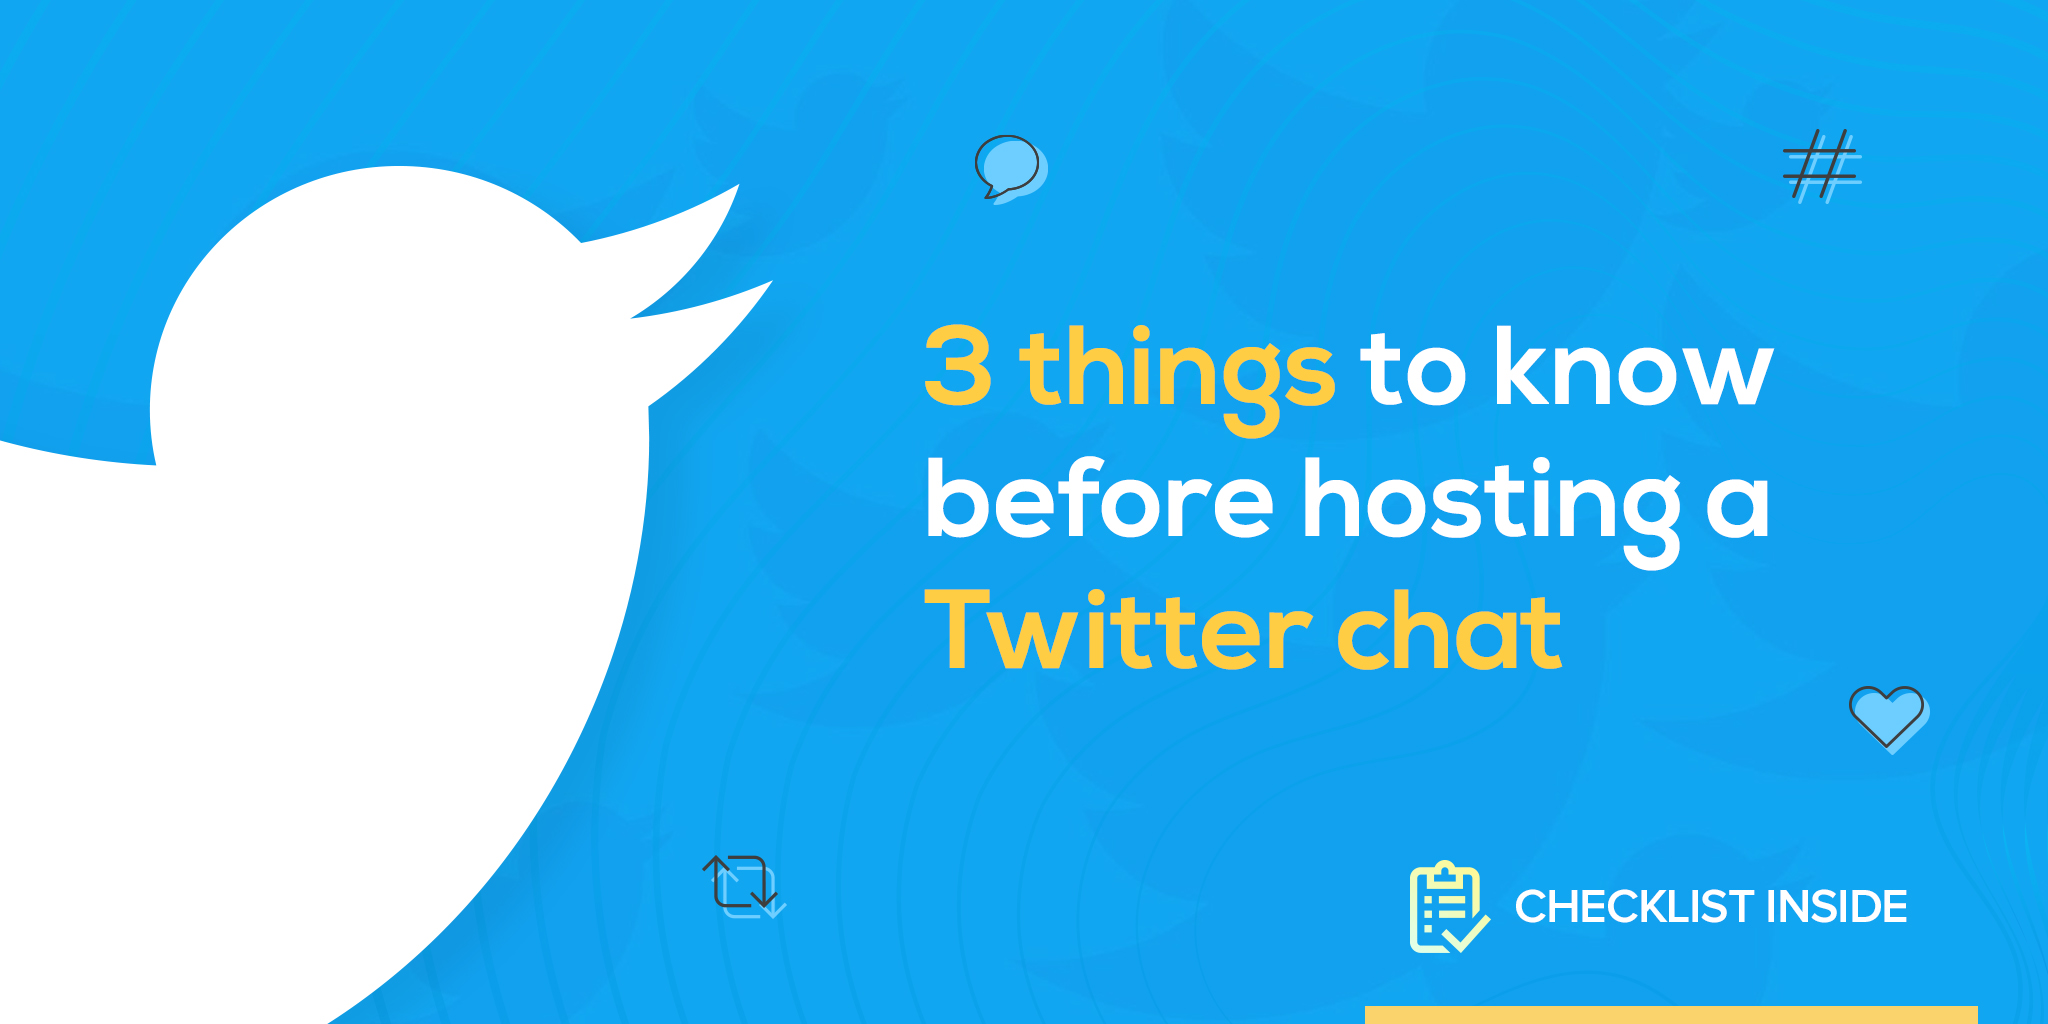 3 things to know before hosting a Twitter chat